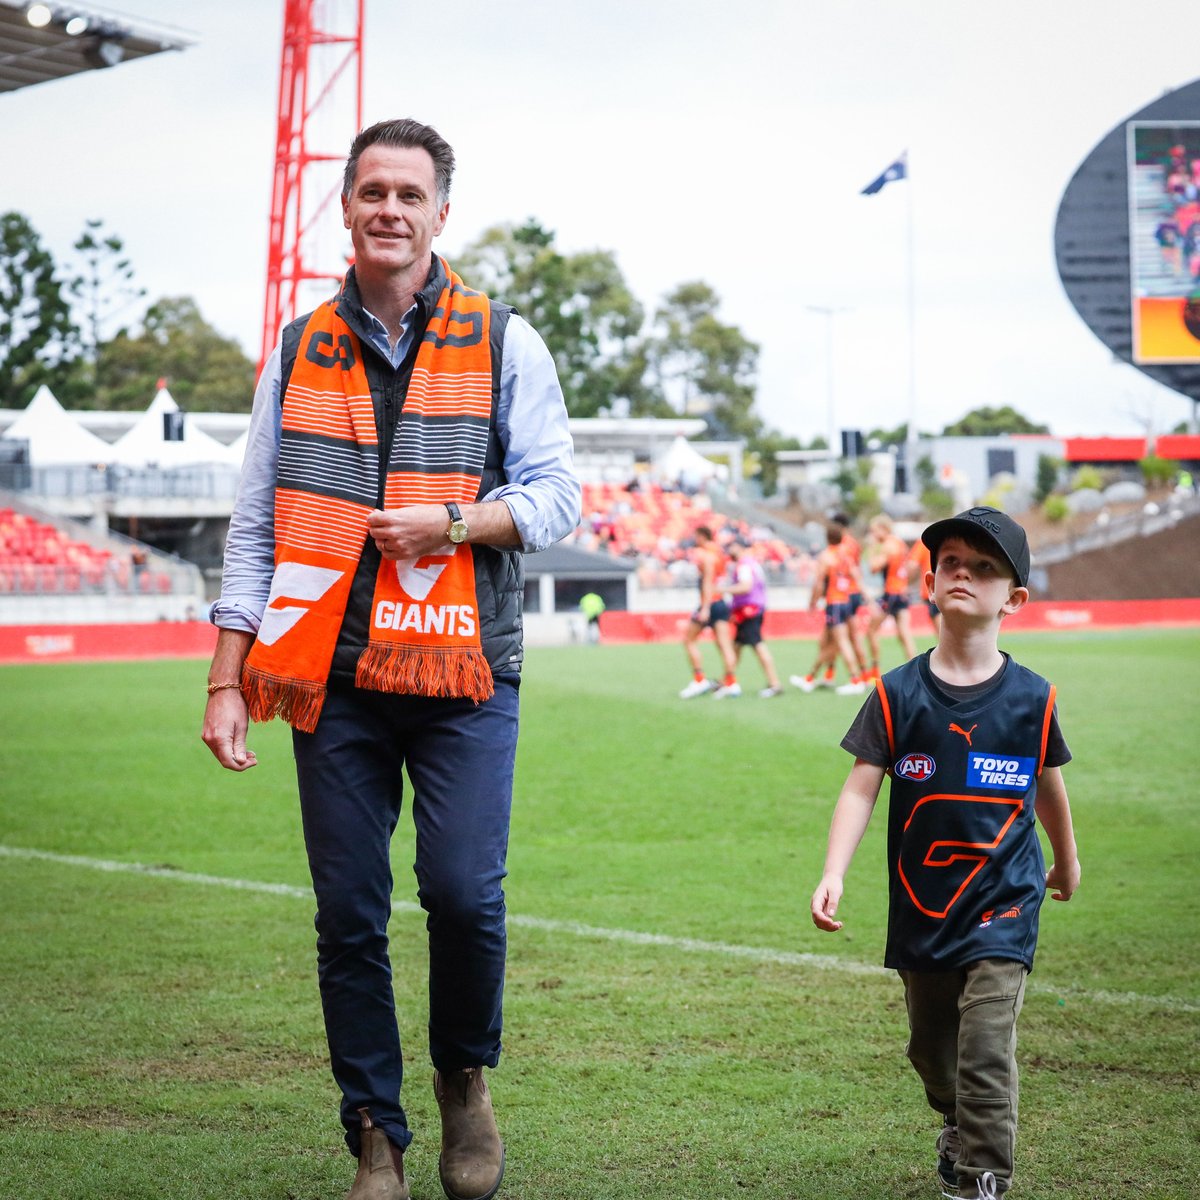 Tossing the coin for the @GWSGIANTS vs @CarltonFC game with my tr...